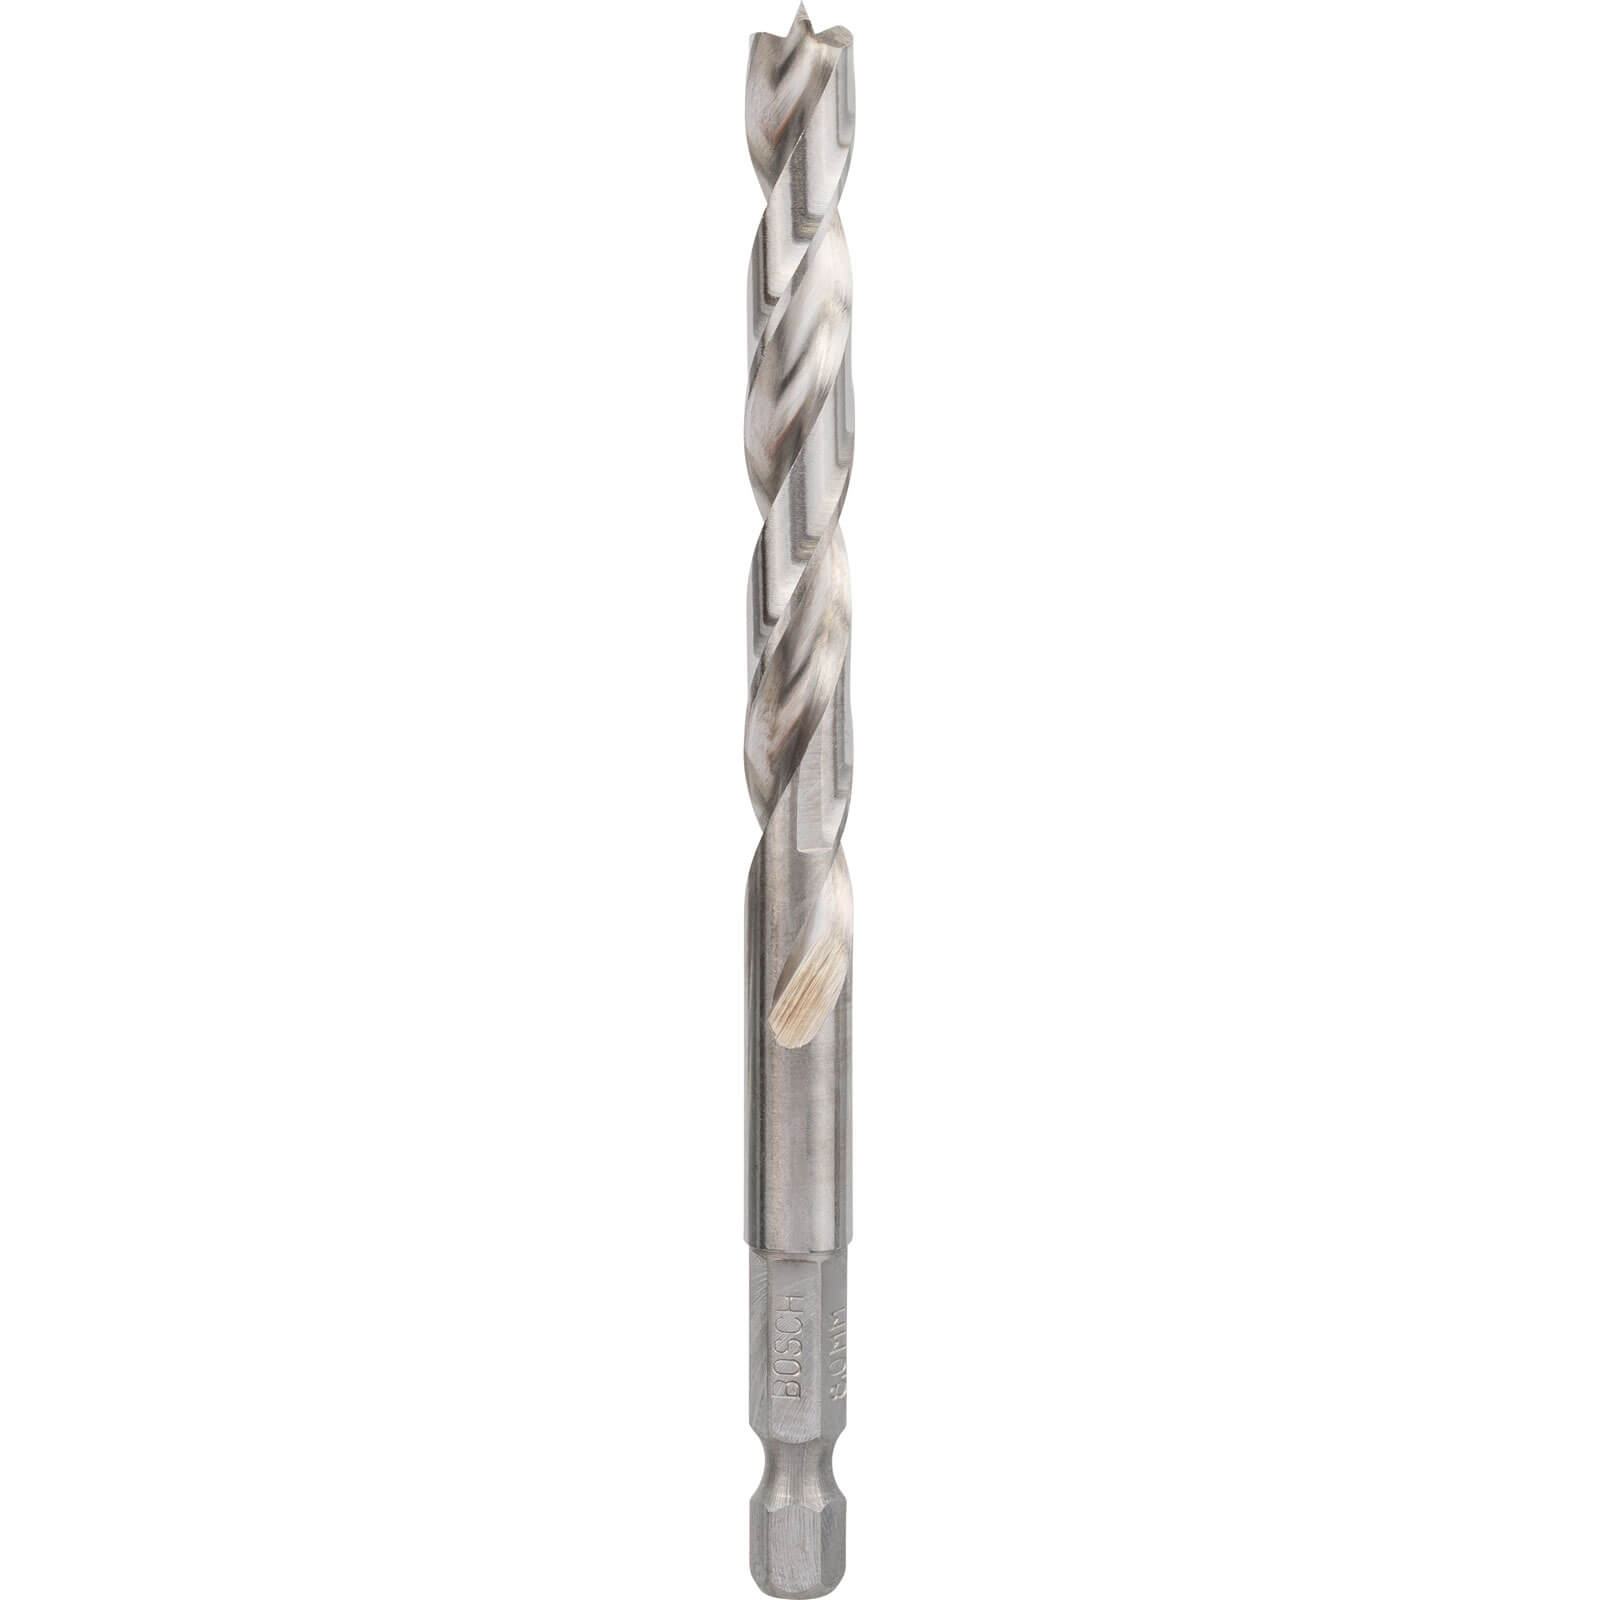 Image of Bosch Hex Shank Drill Bit for Wood 8mm